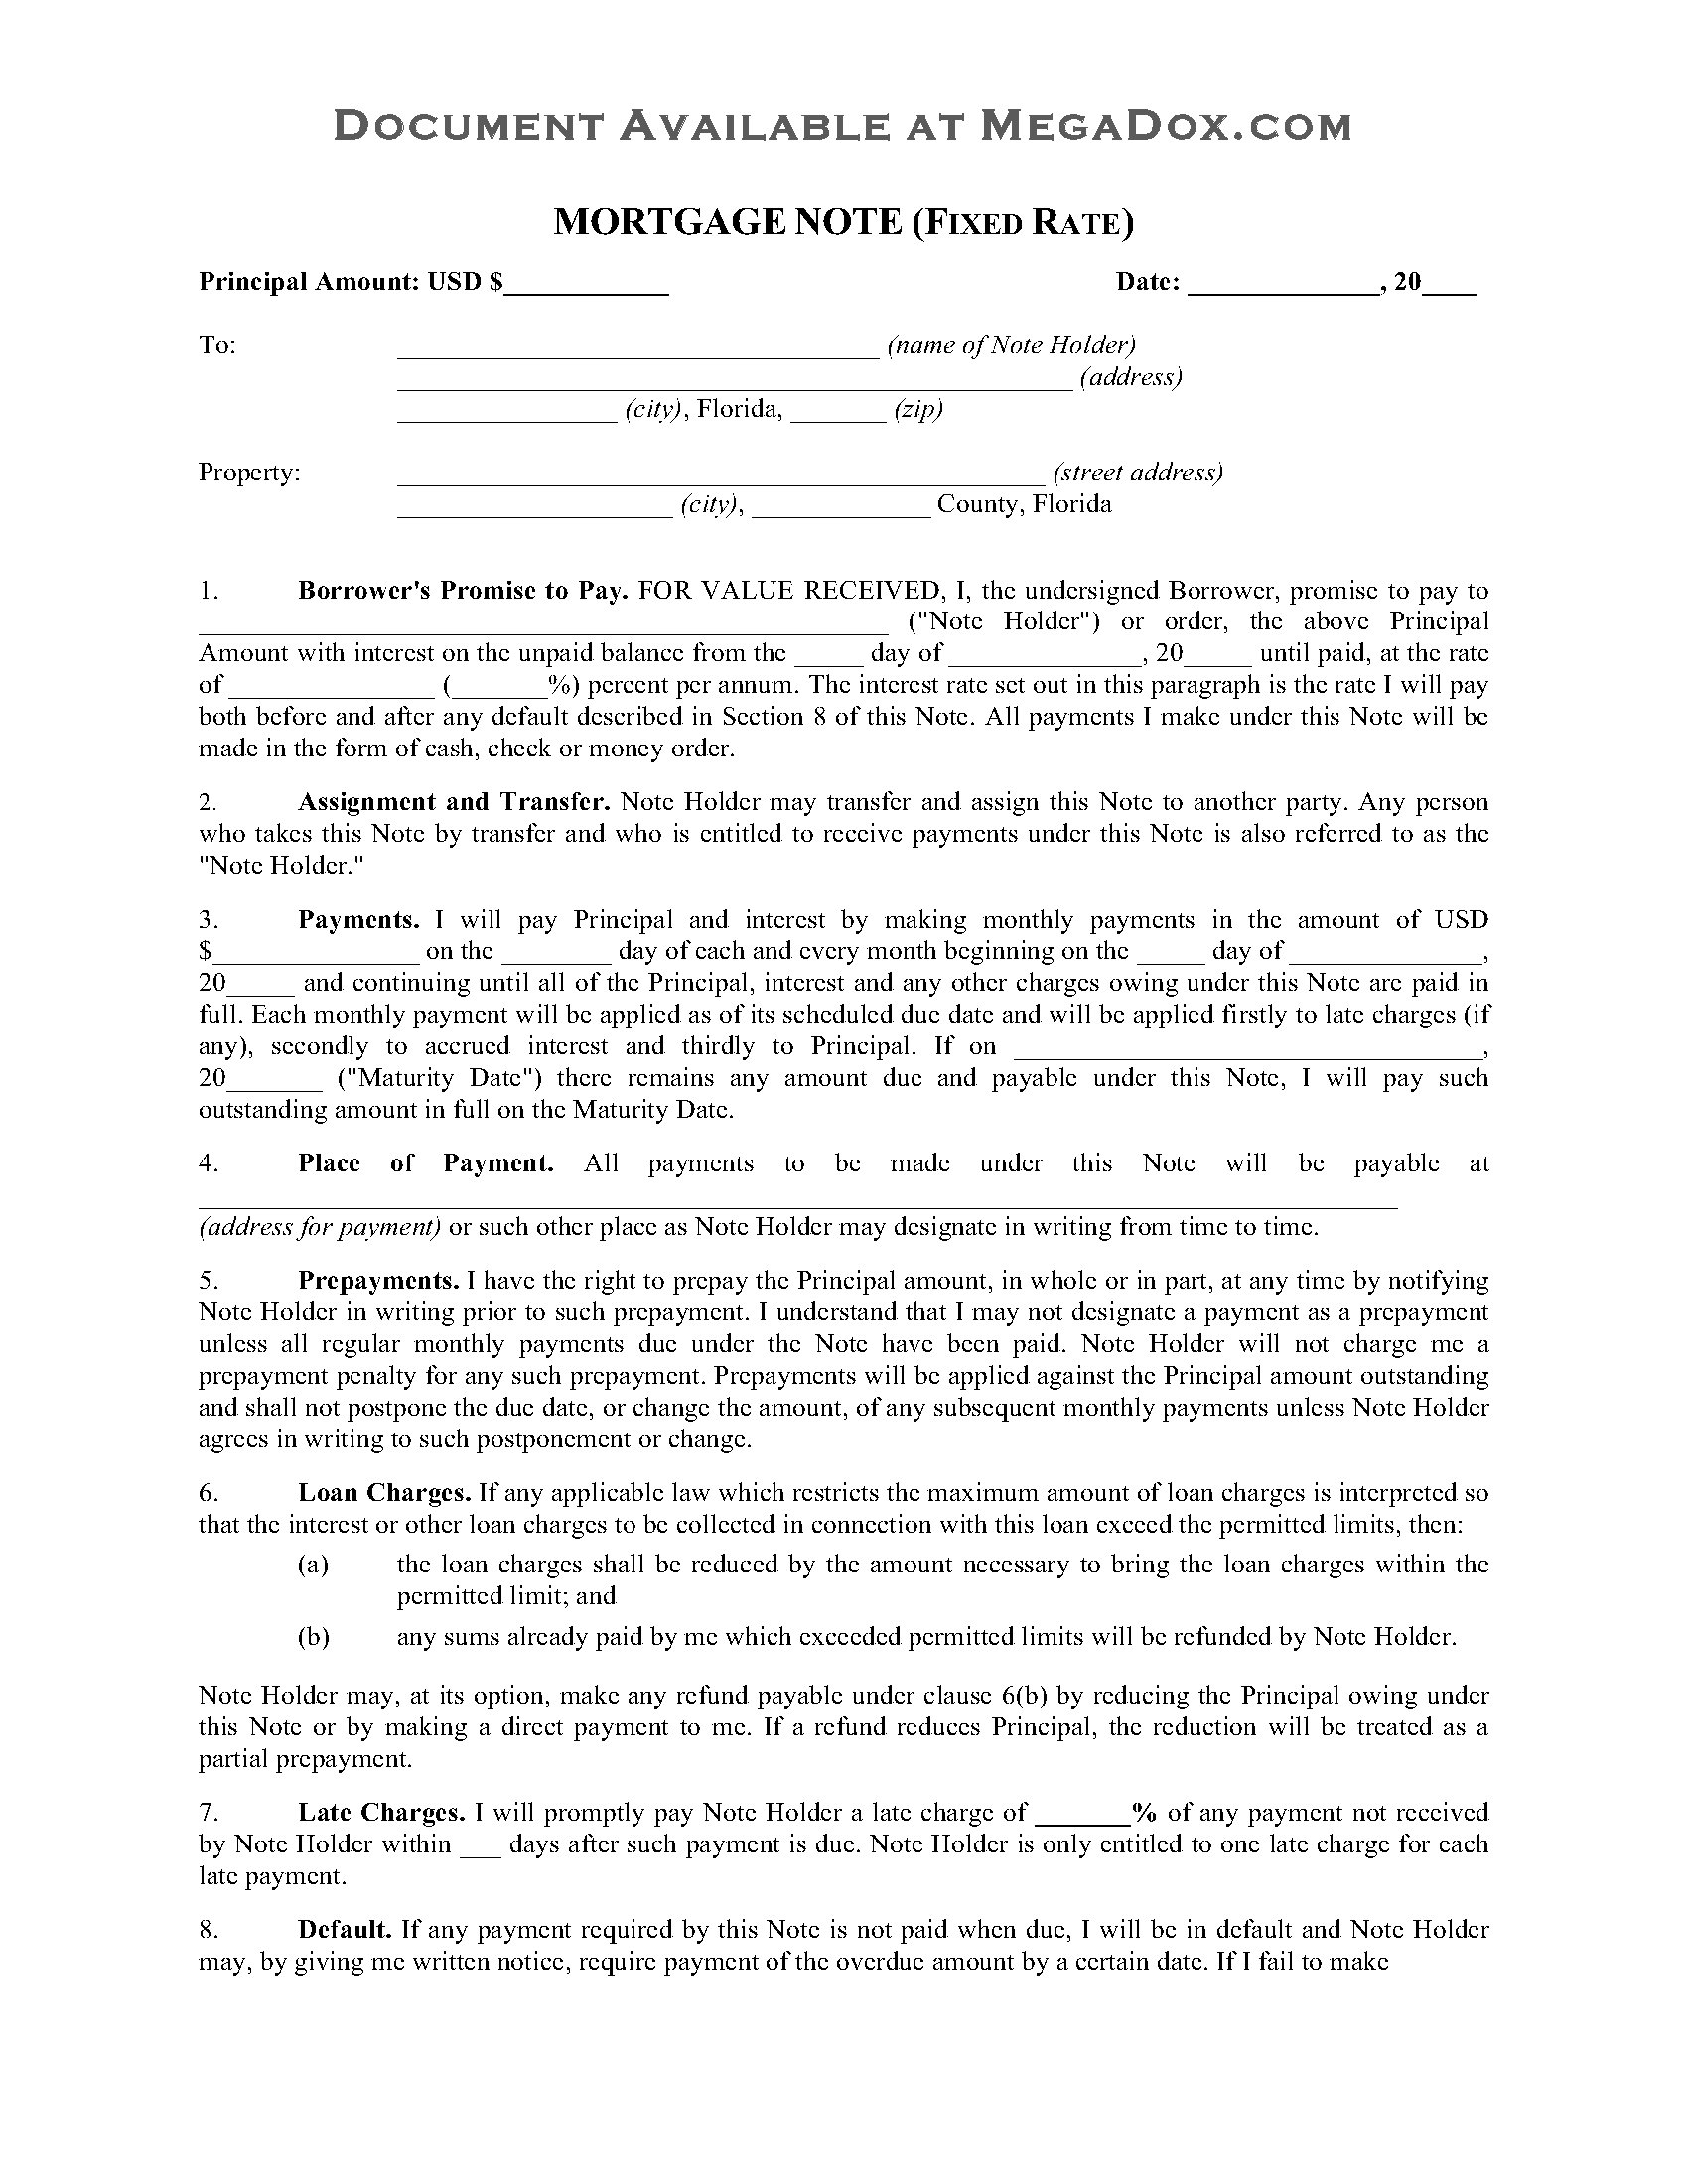 Florida Fixed Rate Mortgage Note  Legal Forms and Business Throughout Mortgage Note Template